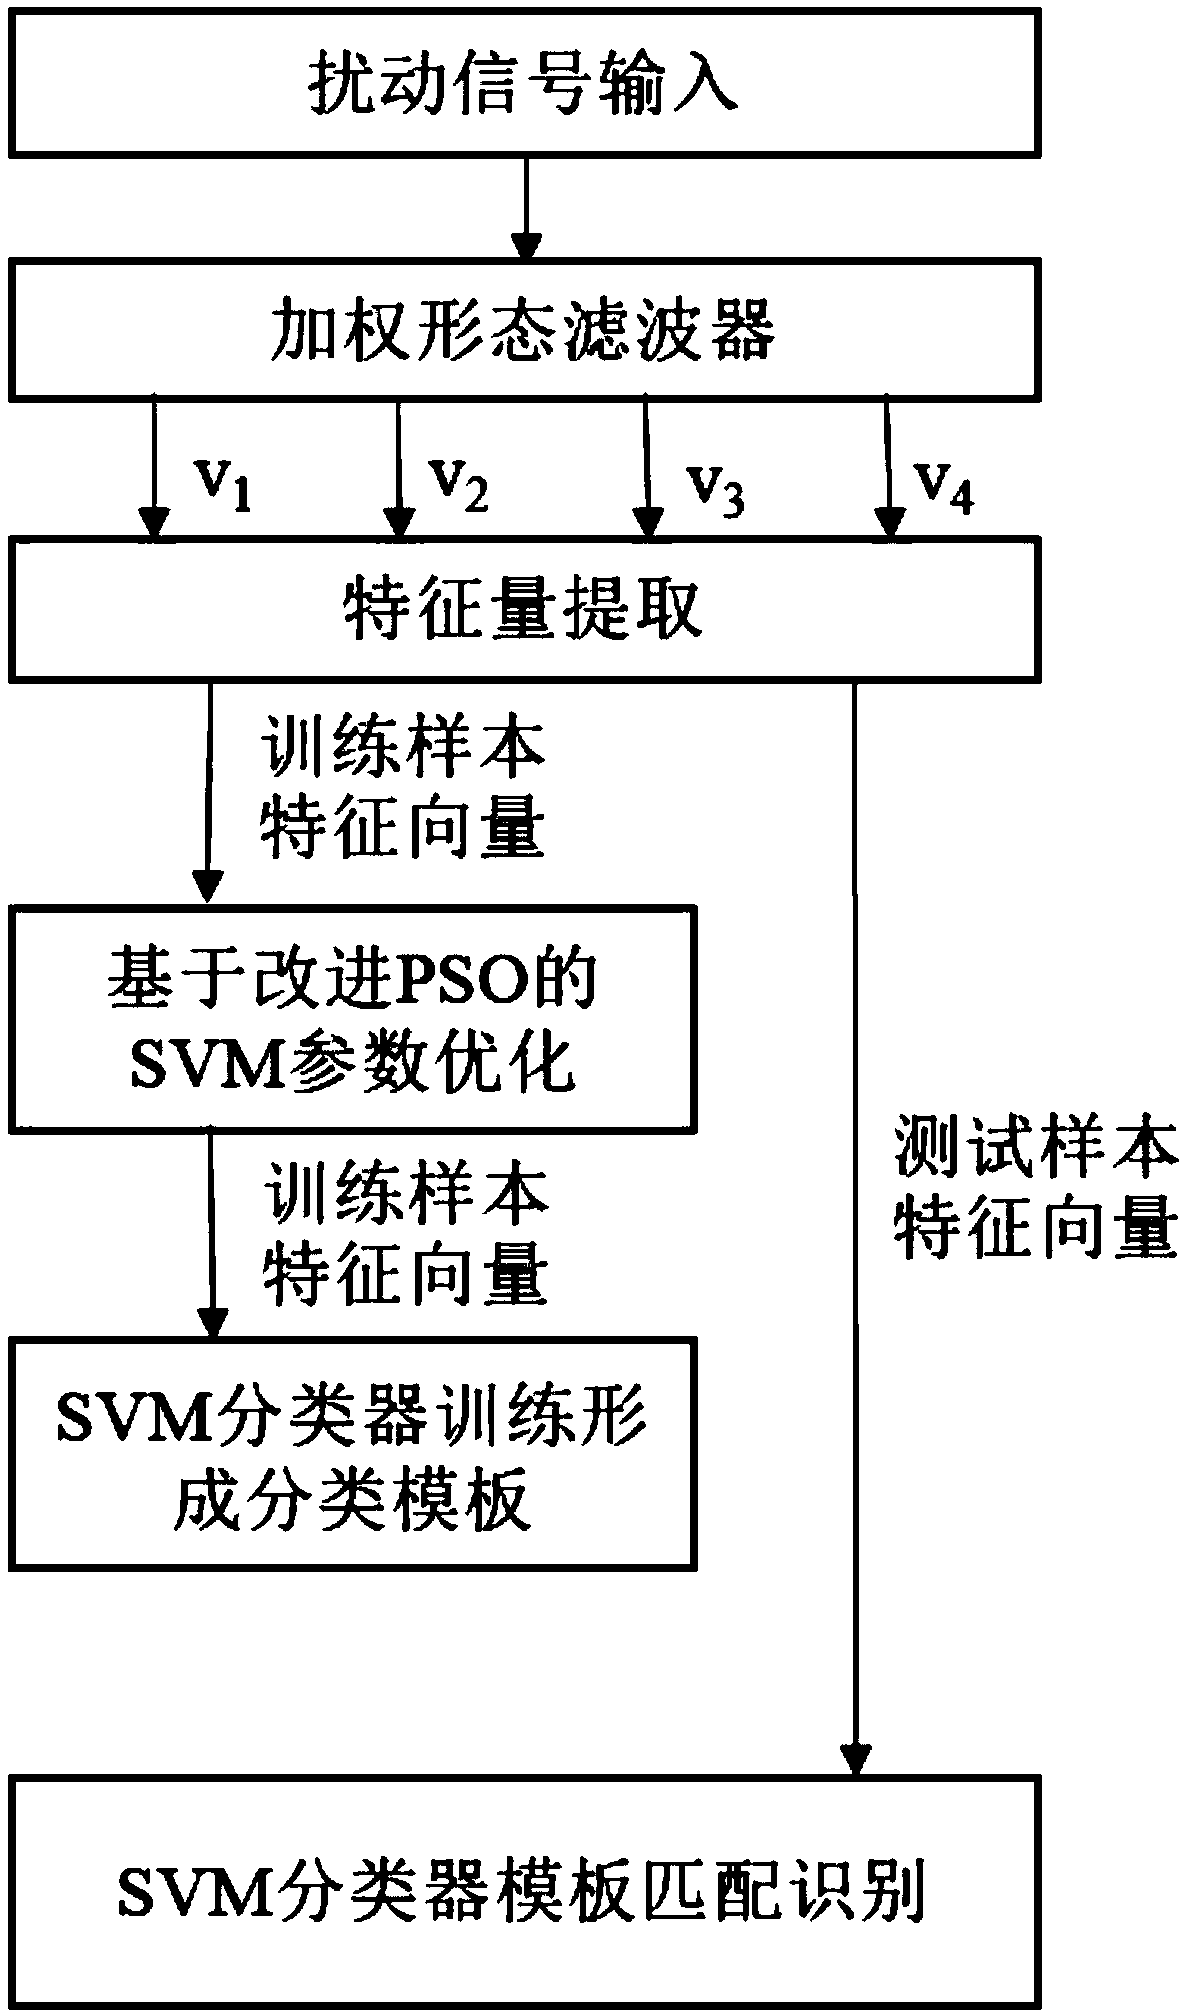 Electric energy quality disturbance recognition method based on improved PSO (Particle Swarm Optimization) and SVM (Support Vector Machine)